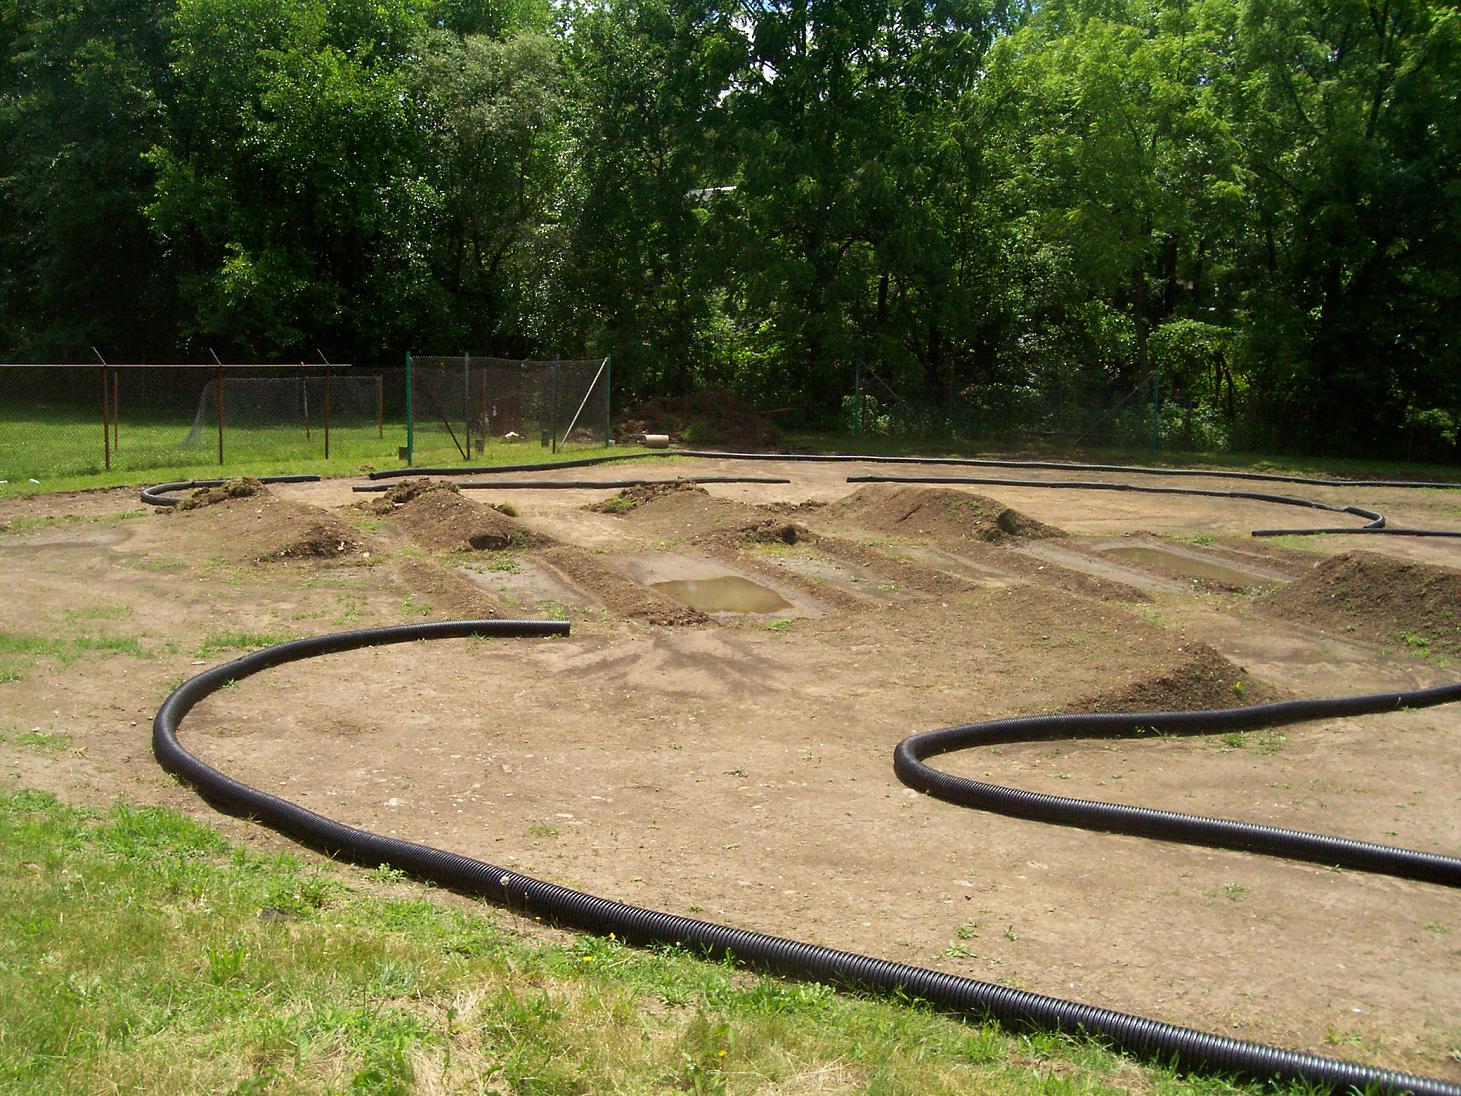 NEW off-road track in JEANNETTE PA - R/C Tech Forums